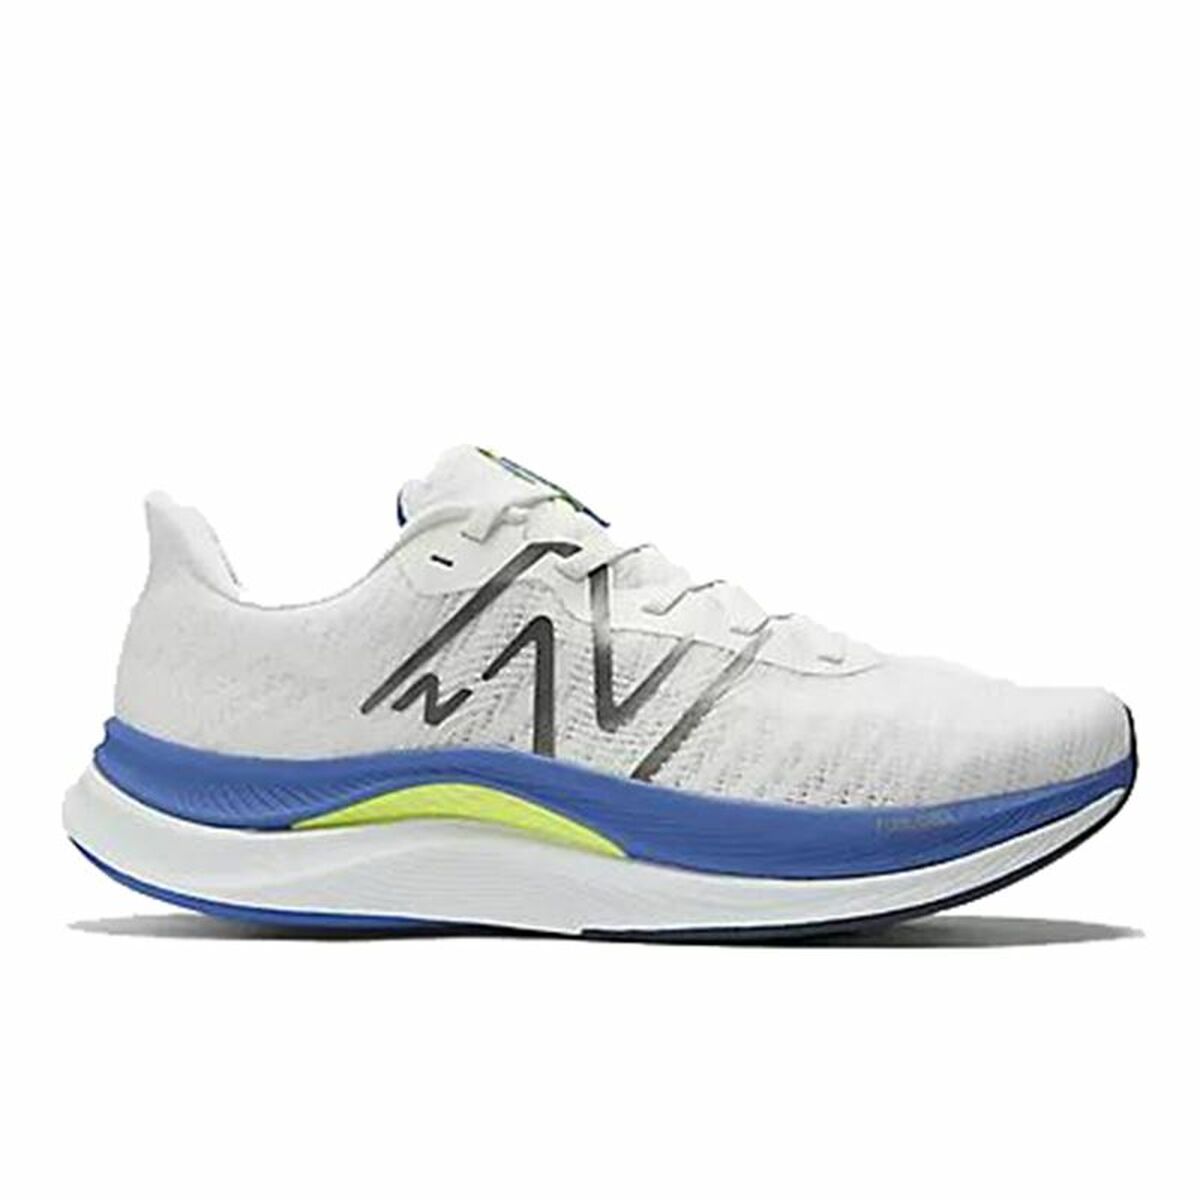 Chaussures de Running pour Adultes New Balance FuelCell Propel  Homme Blanc